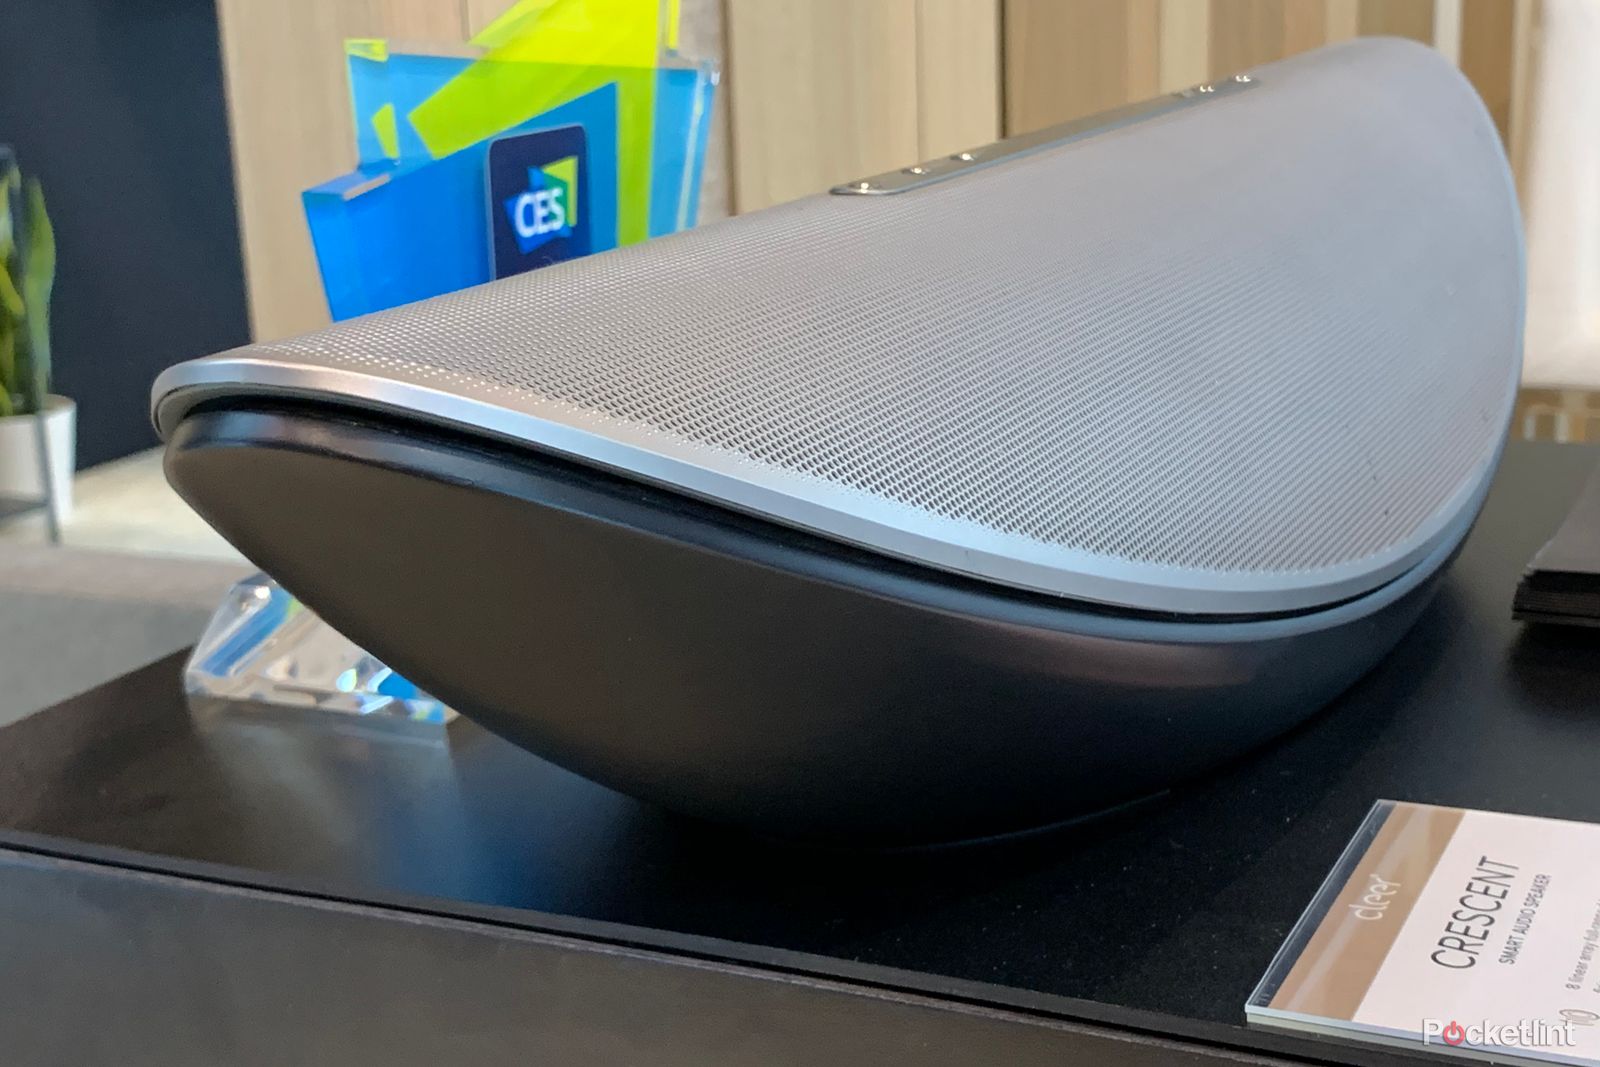 Cleers super-looking Crescent smart speaker will be with us later in 2020 and is sounding great image 1